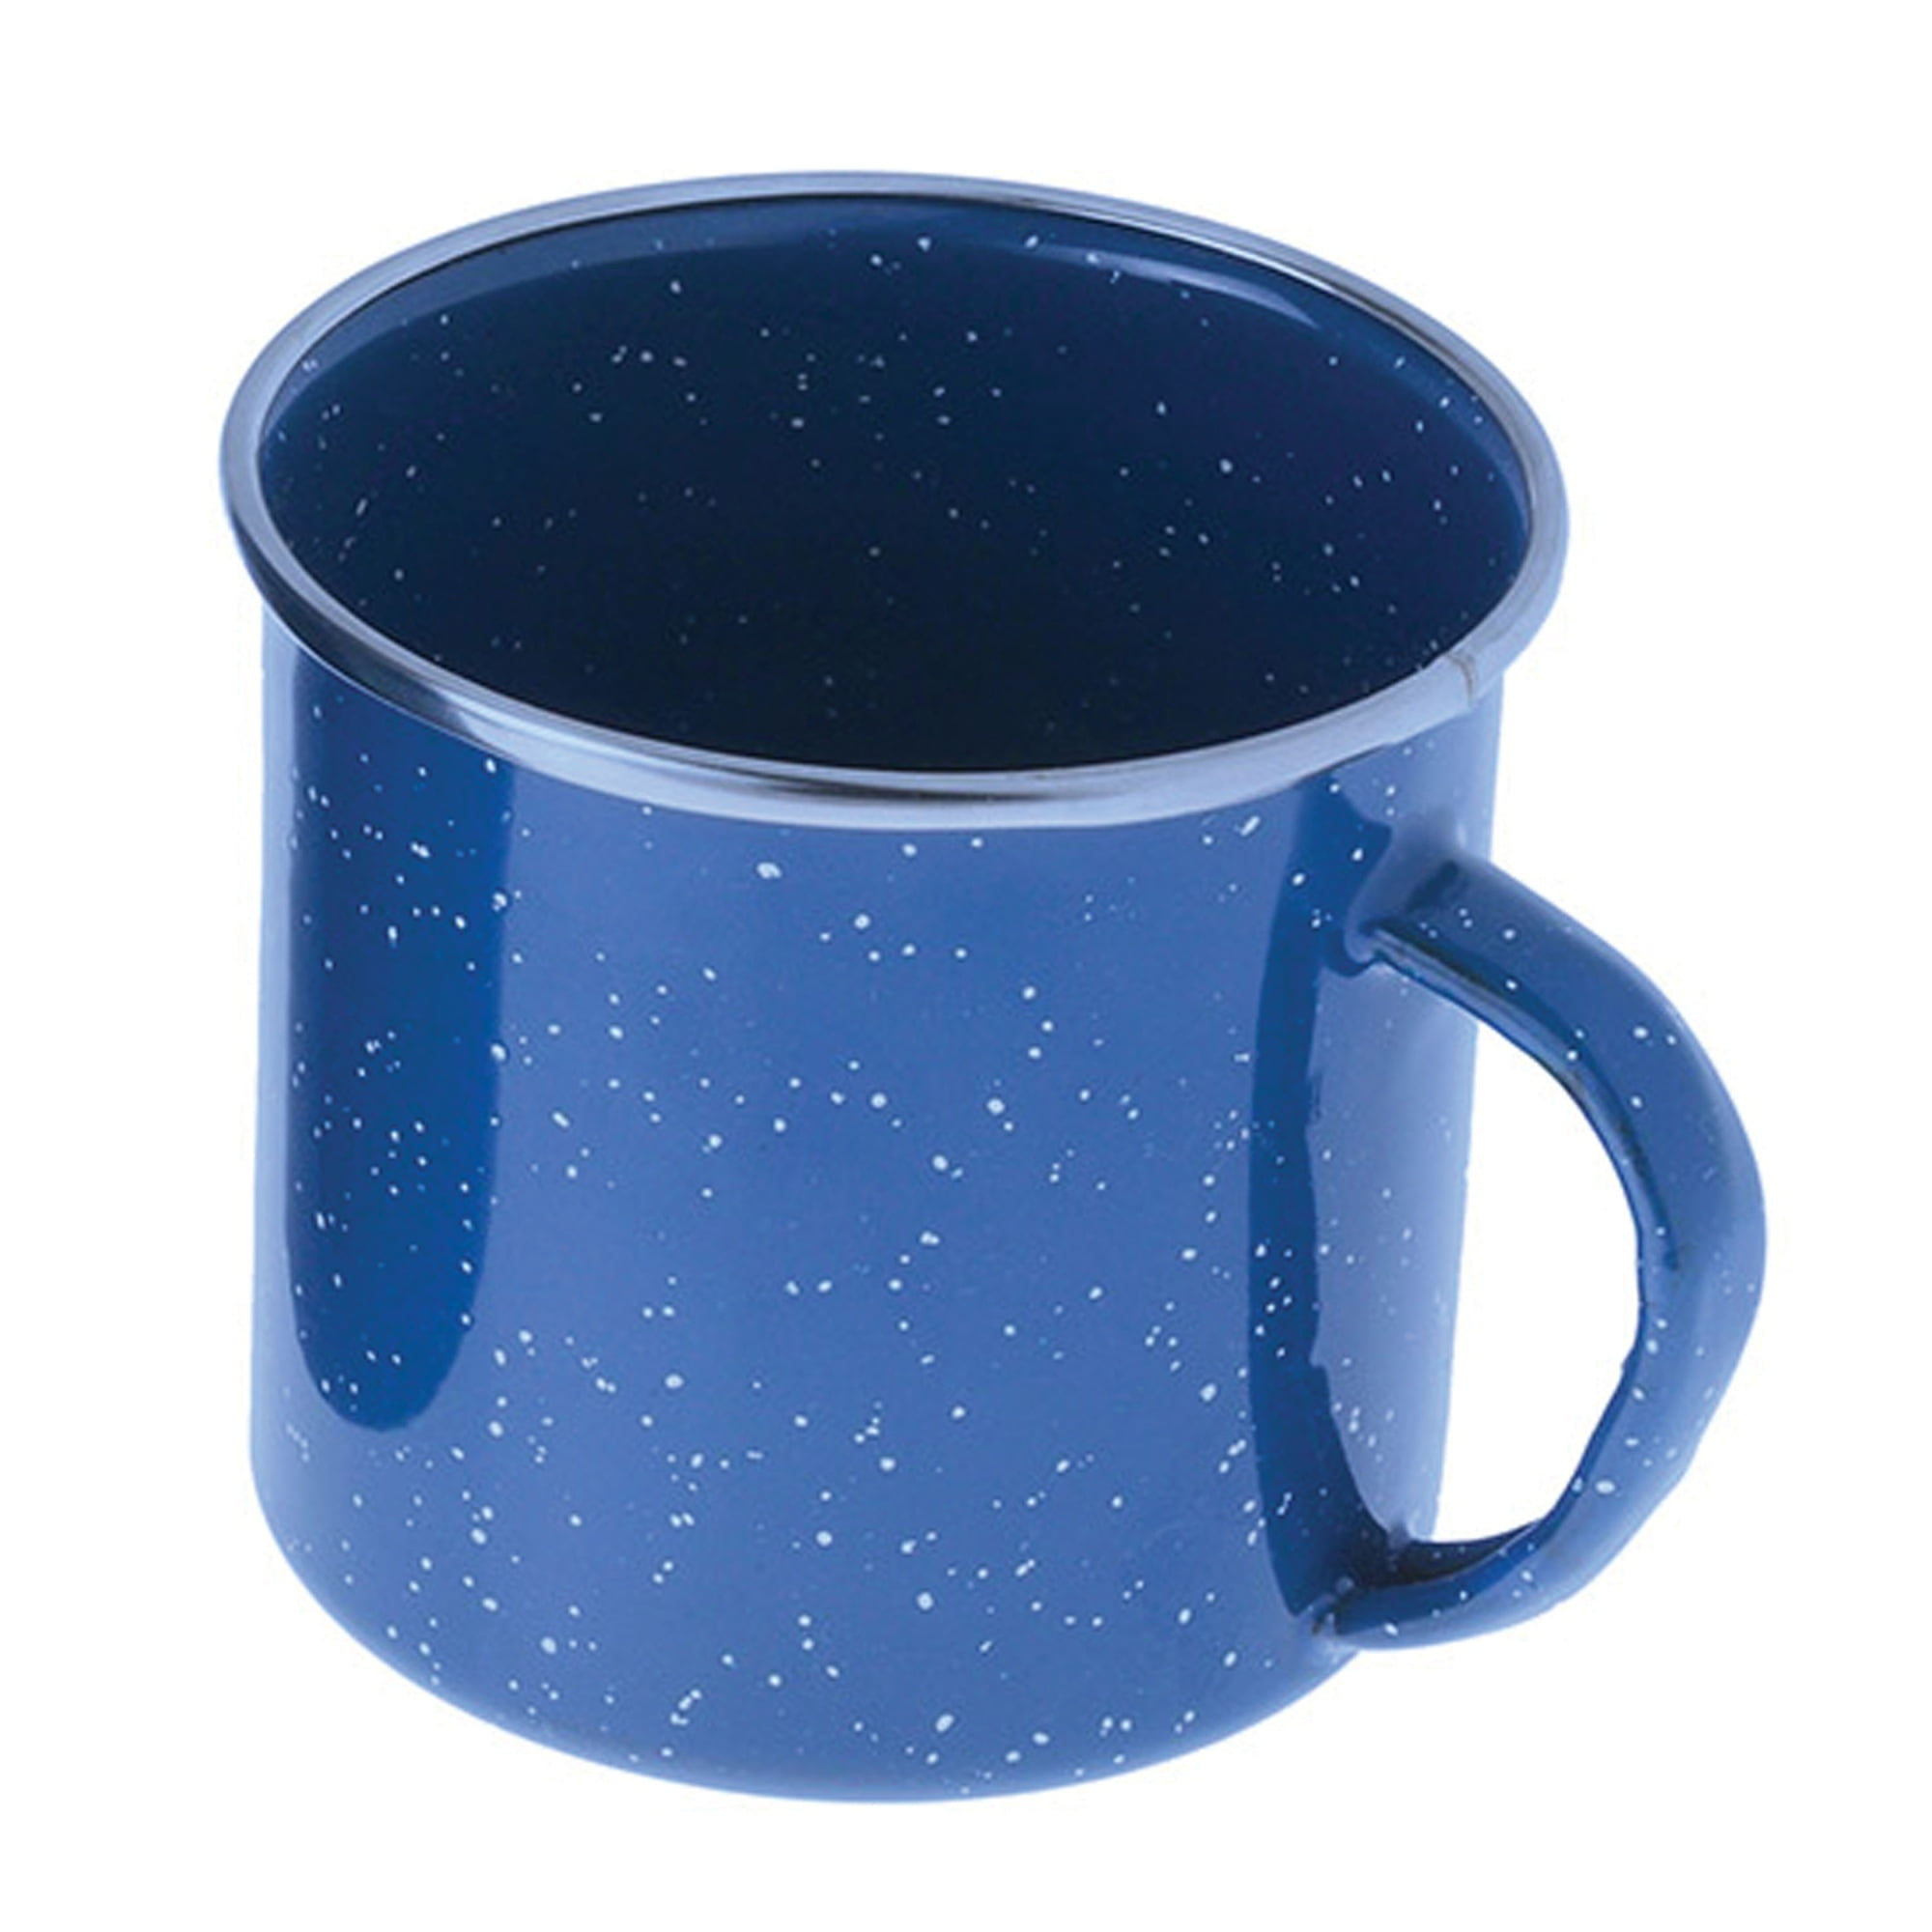 GSI Outdoors 13210 Enamelware Cup 24 FL Oz Blue for sale online 